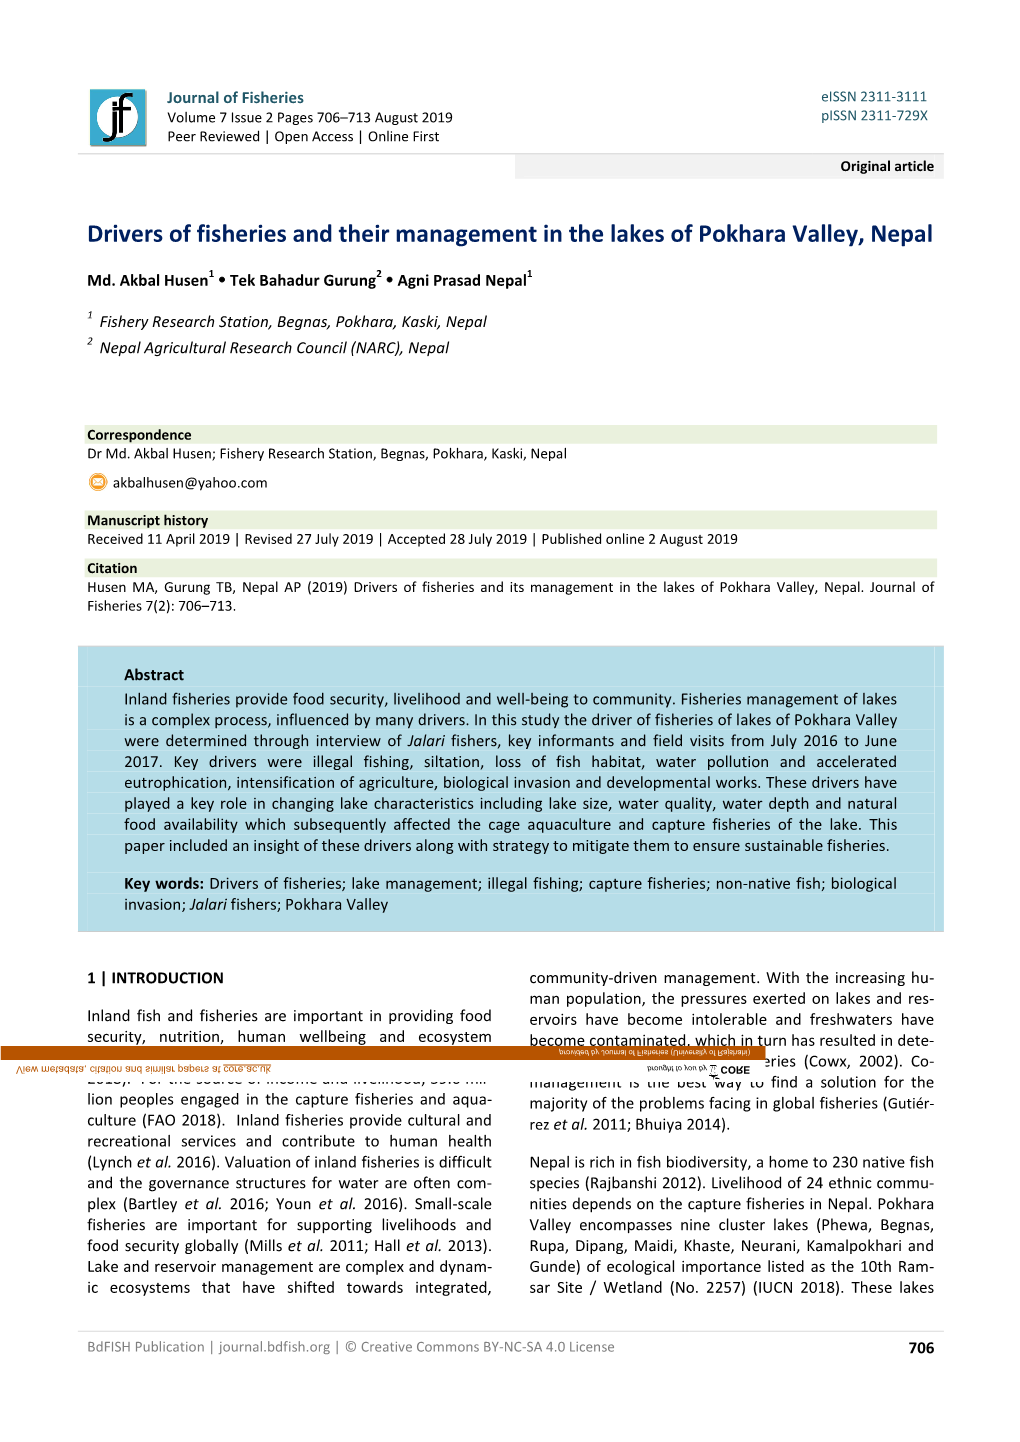 Drivers of Fisheries and Their Management in the Lakes of Pokhara Valley, Nepal